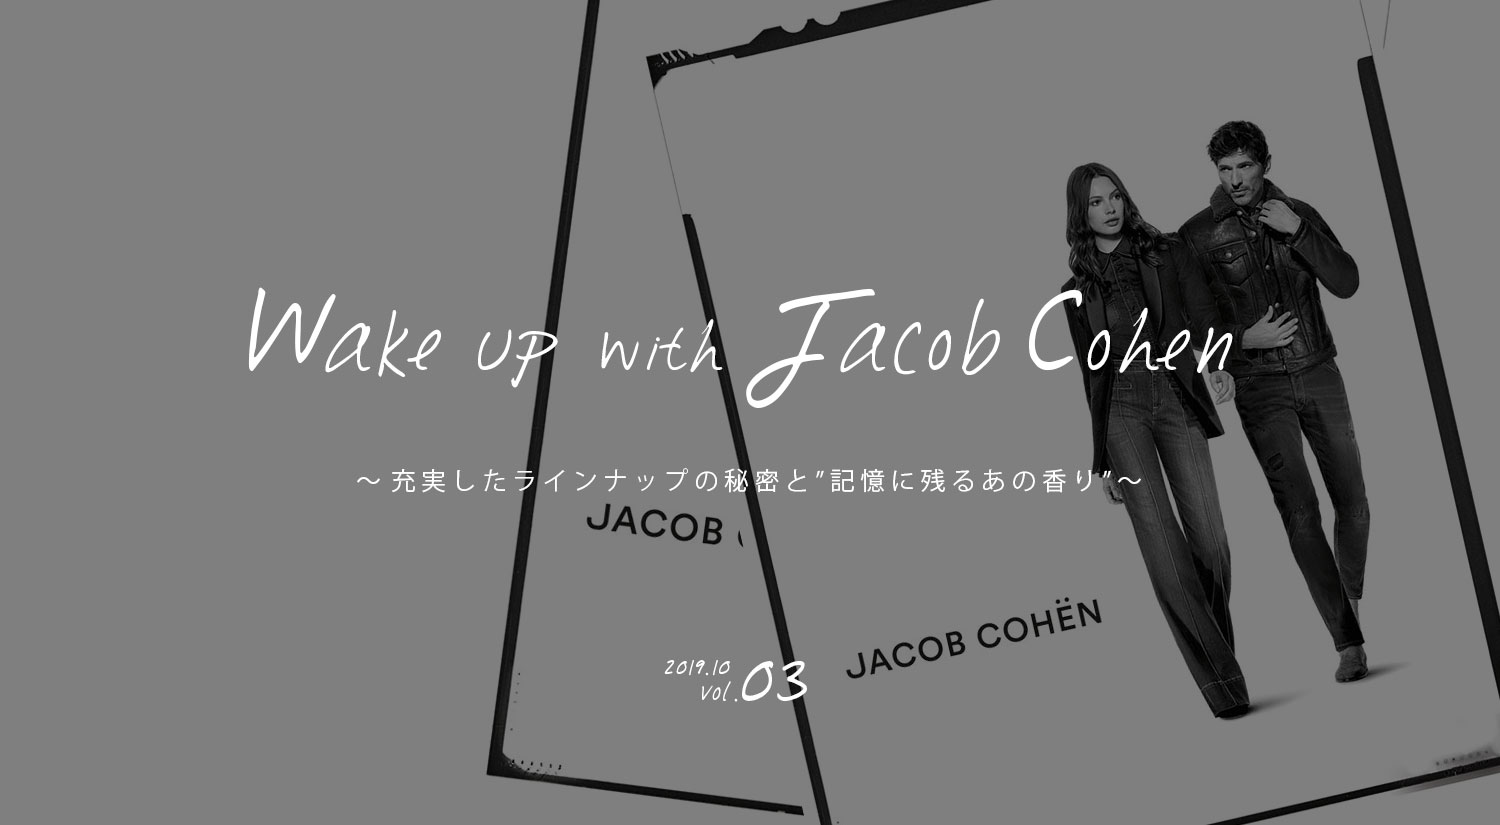 Wake up with Jacob Cohen vol.3公開中